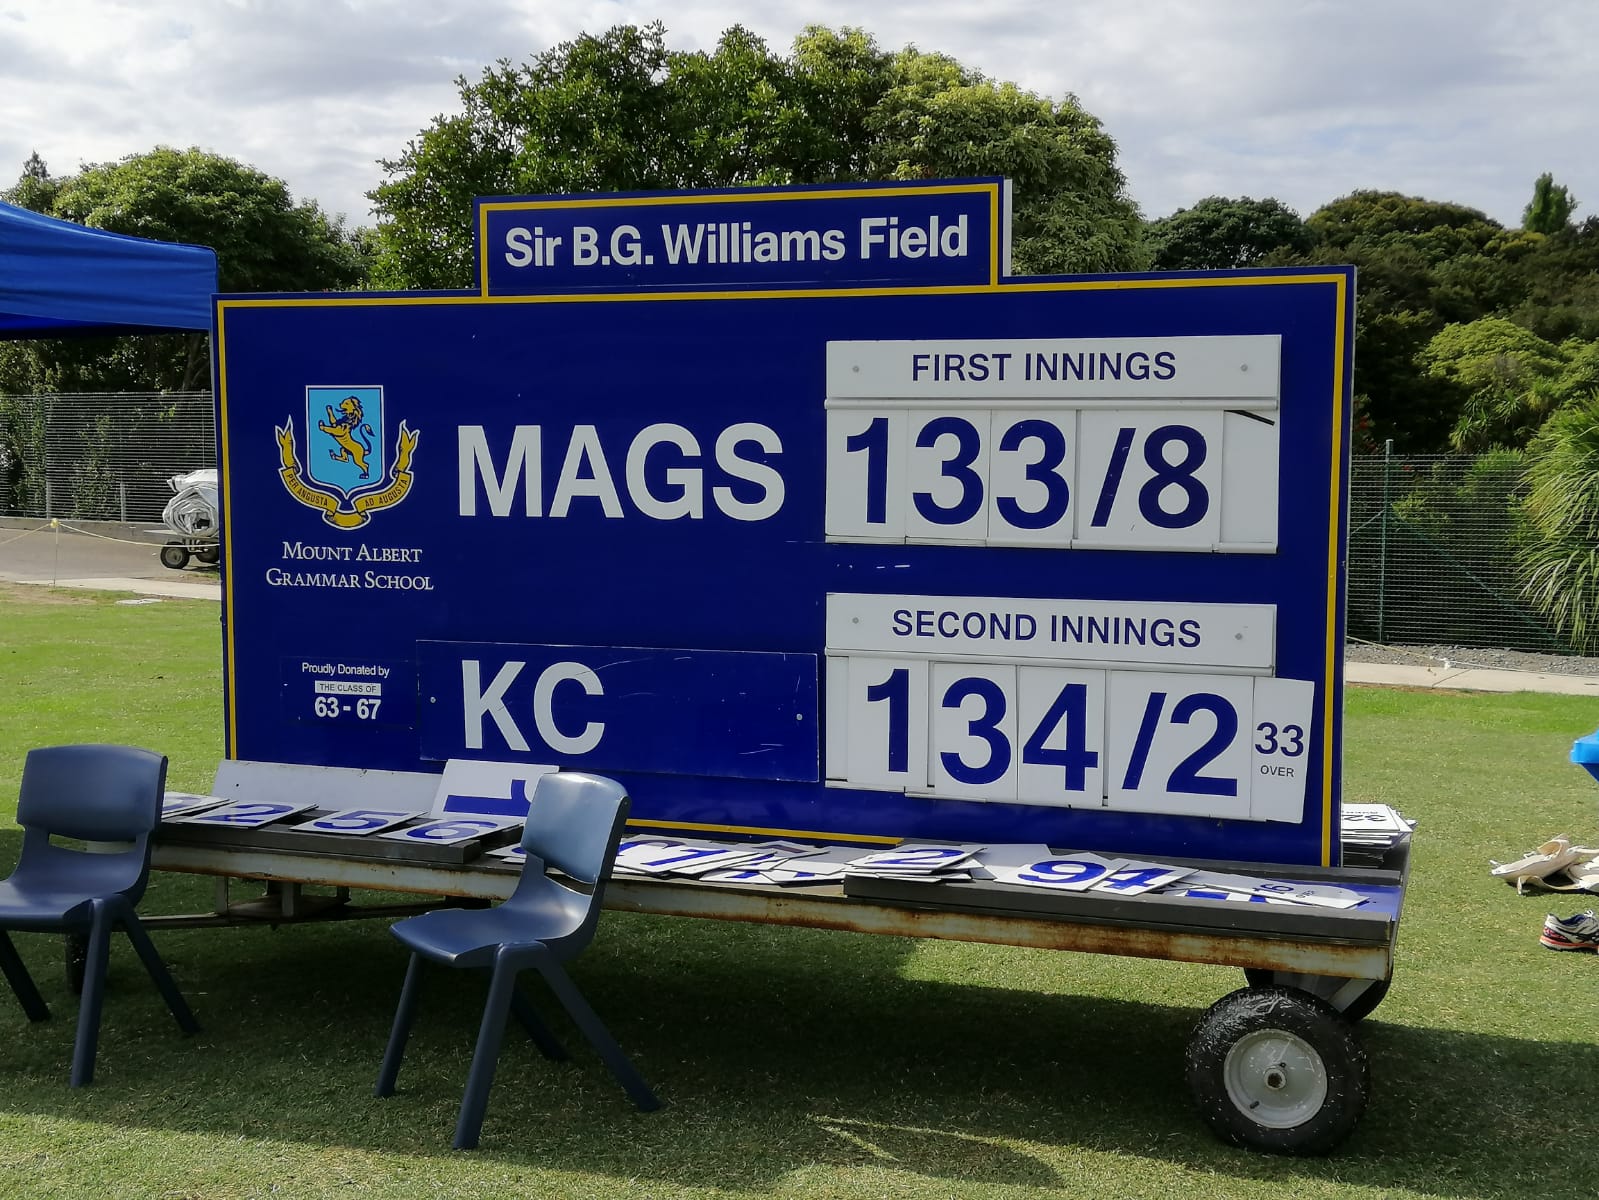 Kings First XI Vs MAGS